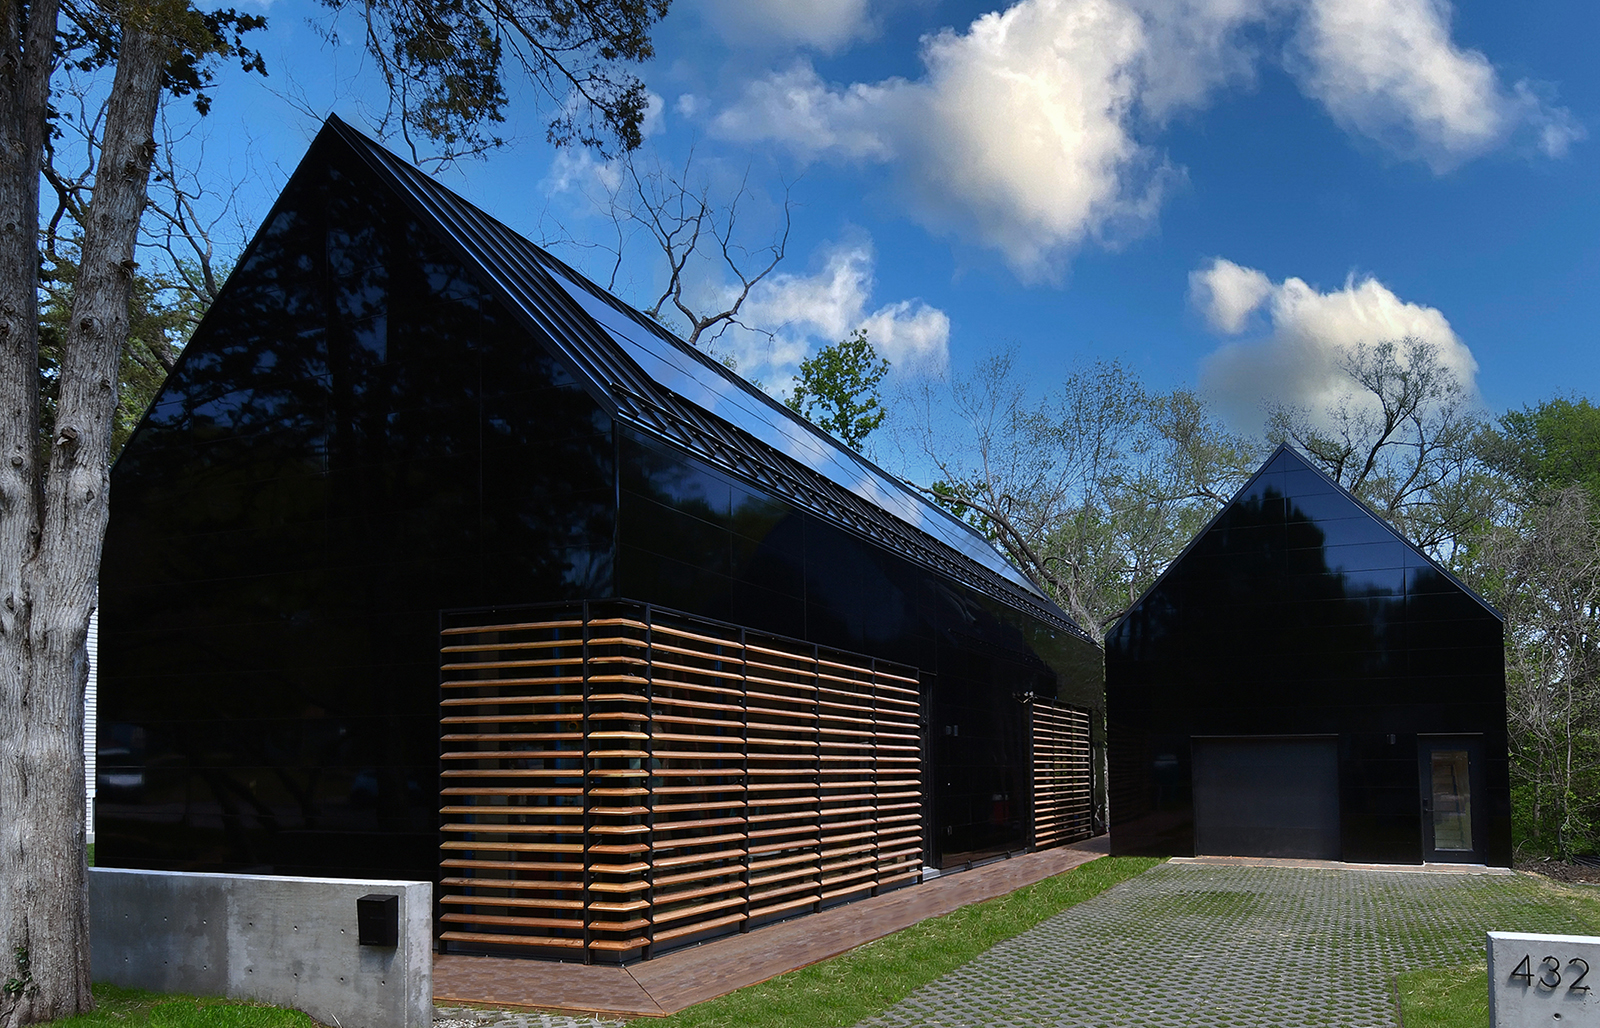 color photograph of modern home with gable roof clad in black, reflective siding. 